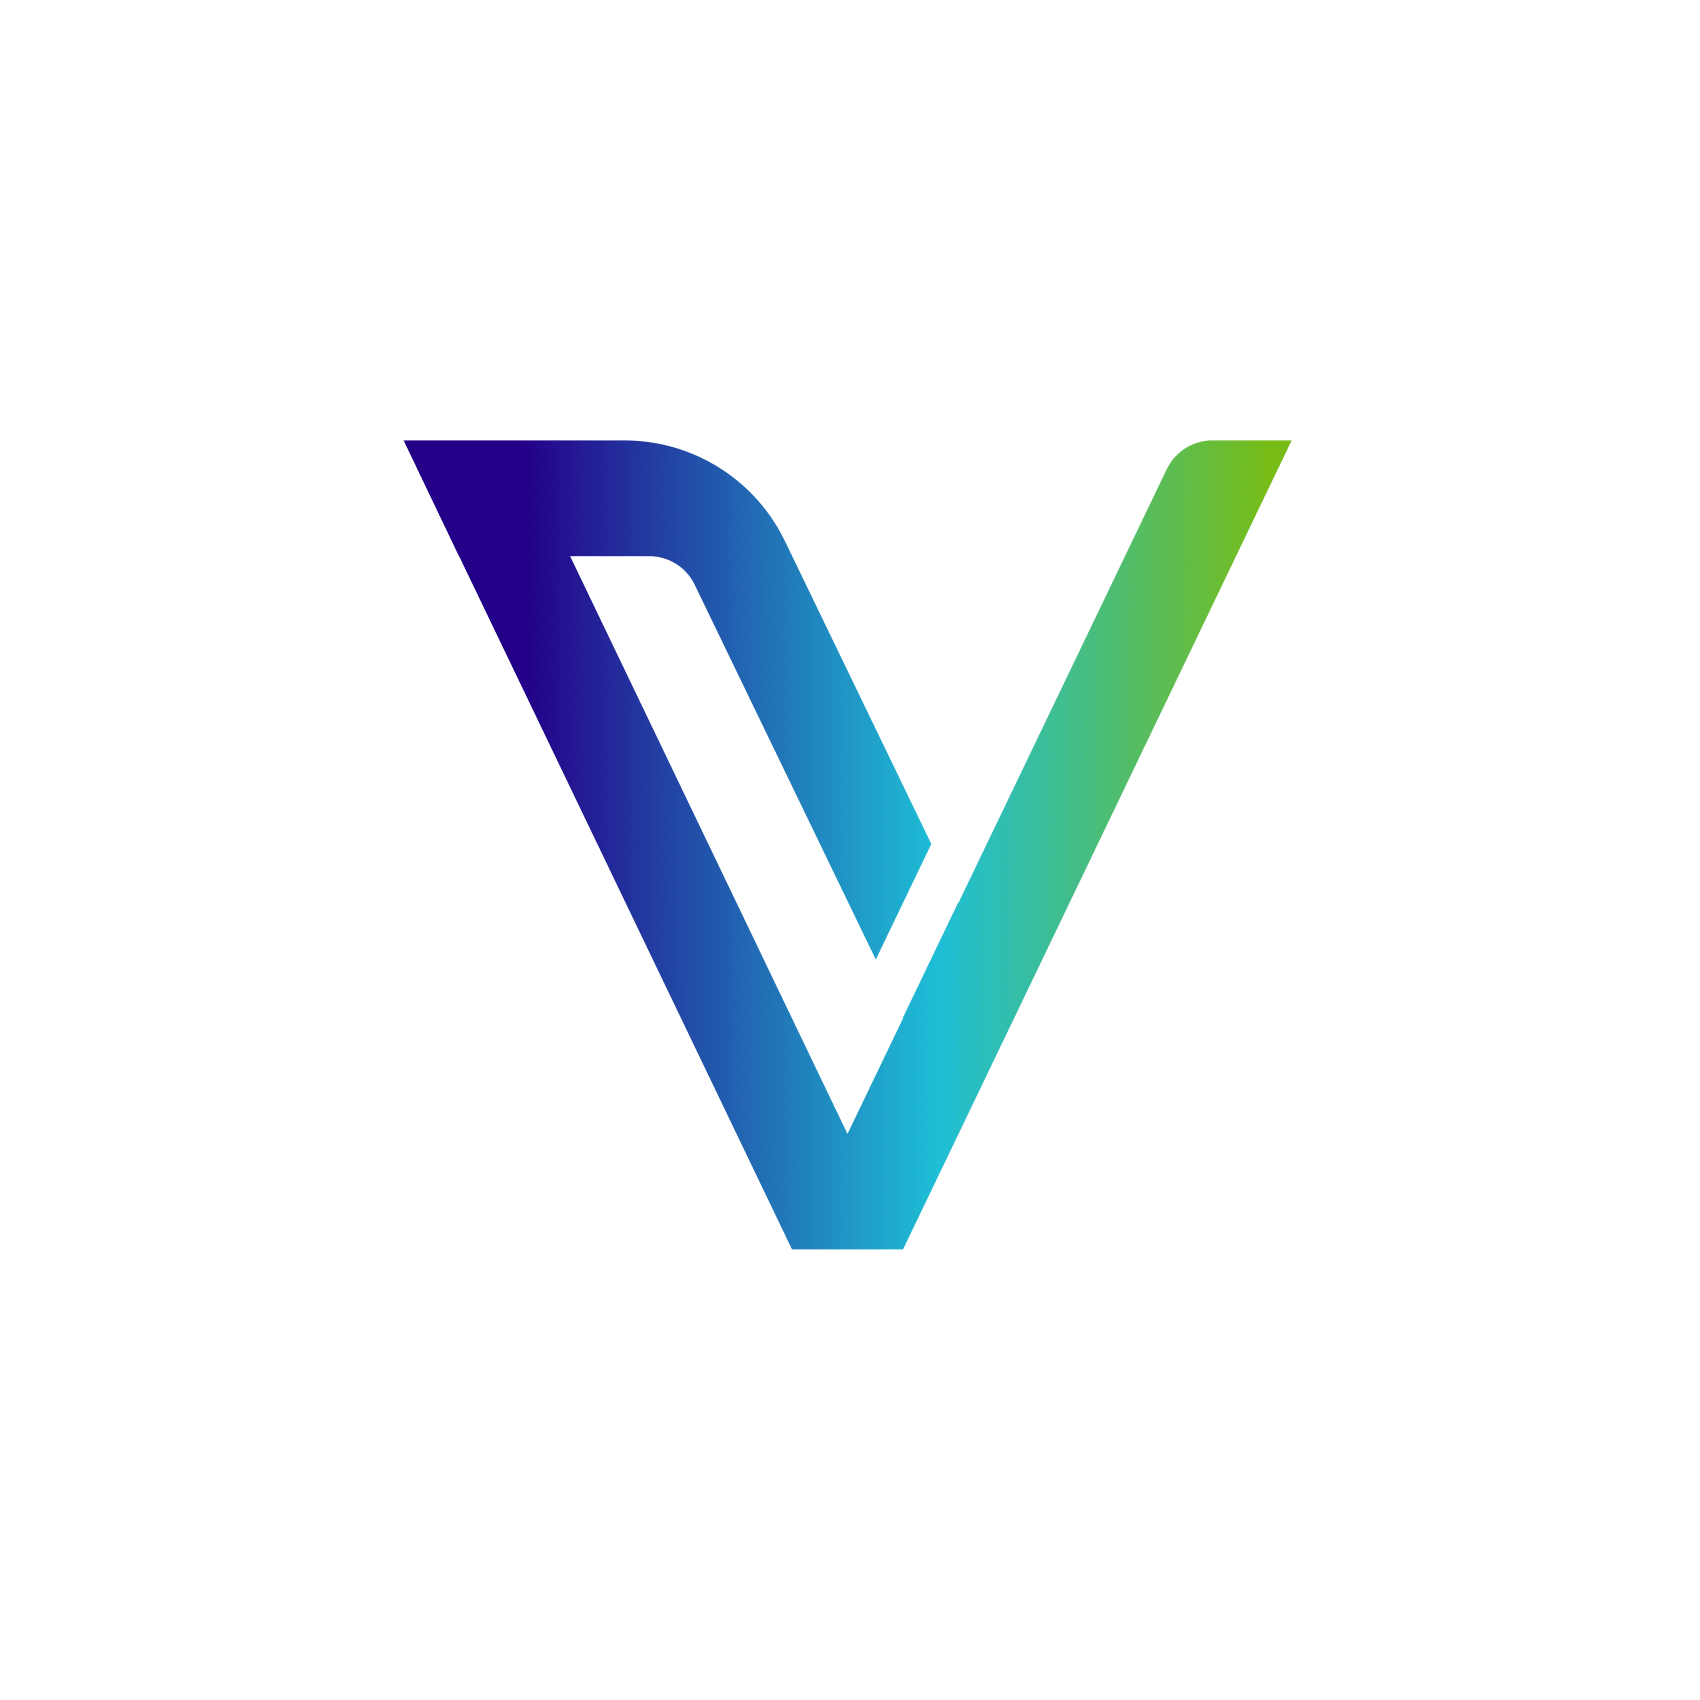 Guest Post by U_Today: VeChain News: What Caused VeThor (VTHO) to Rise 45% | CoinMarketCap